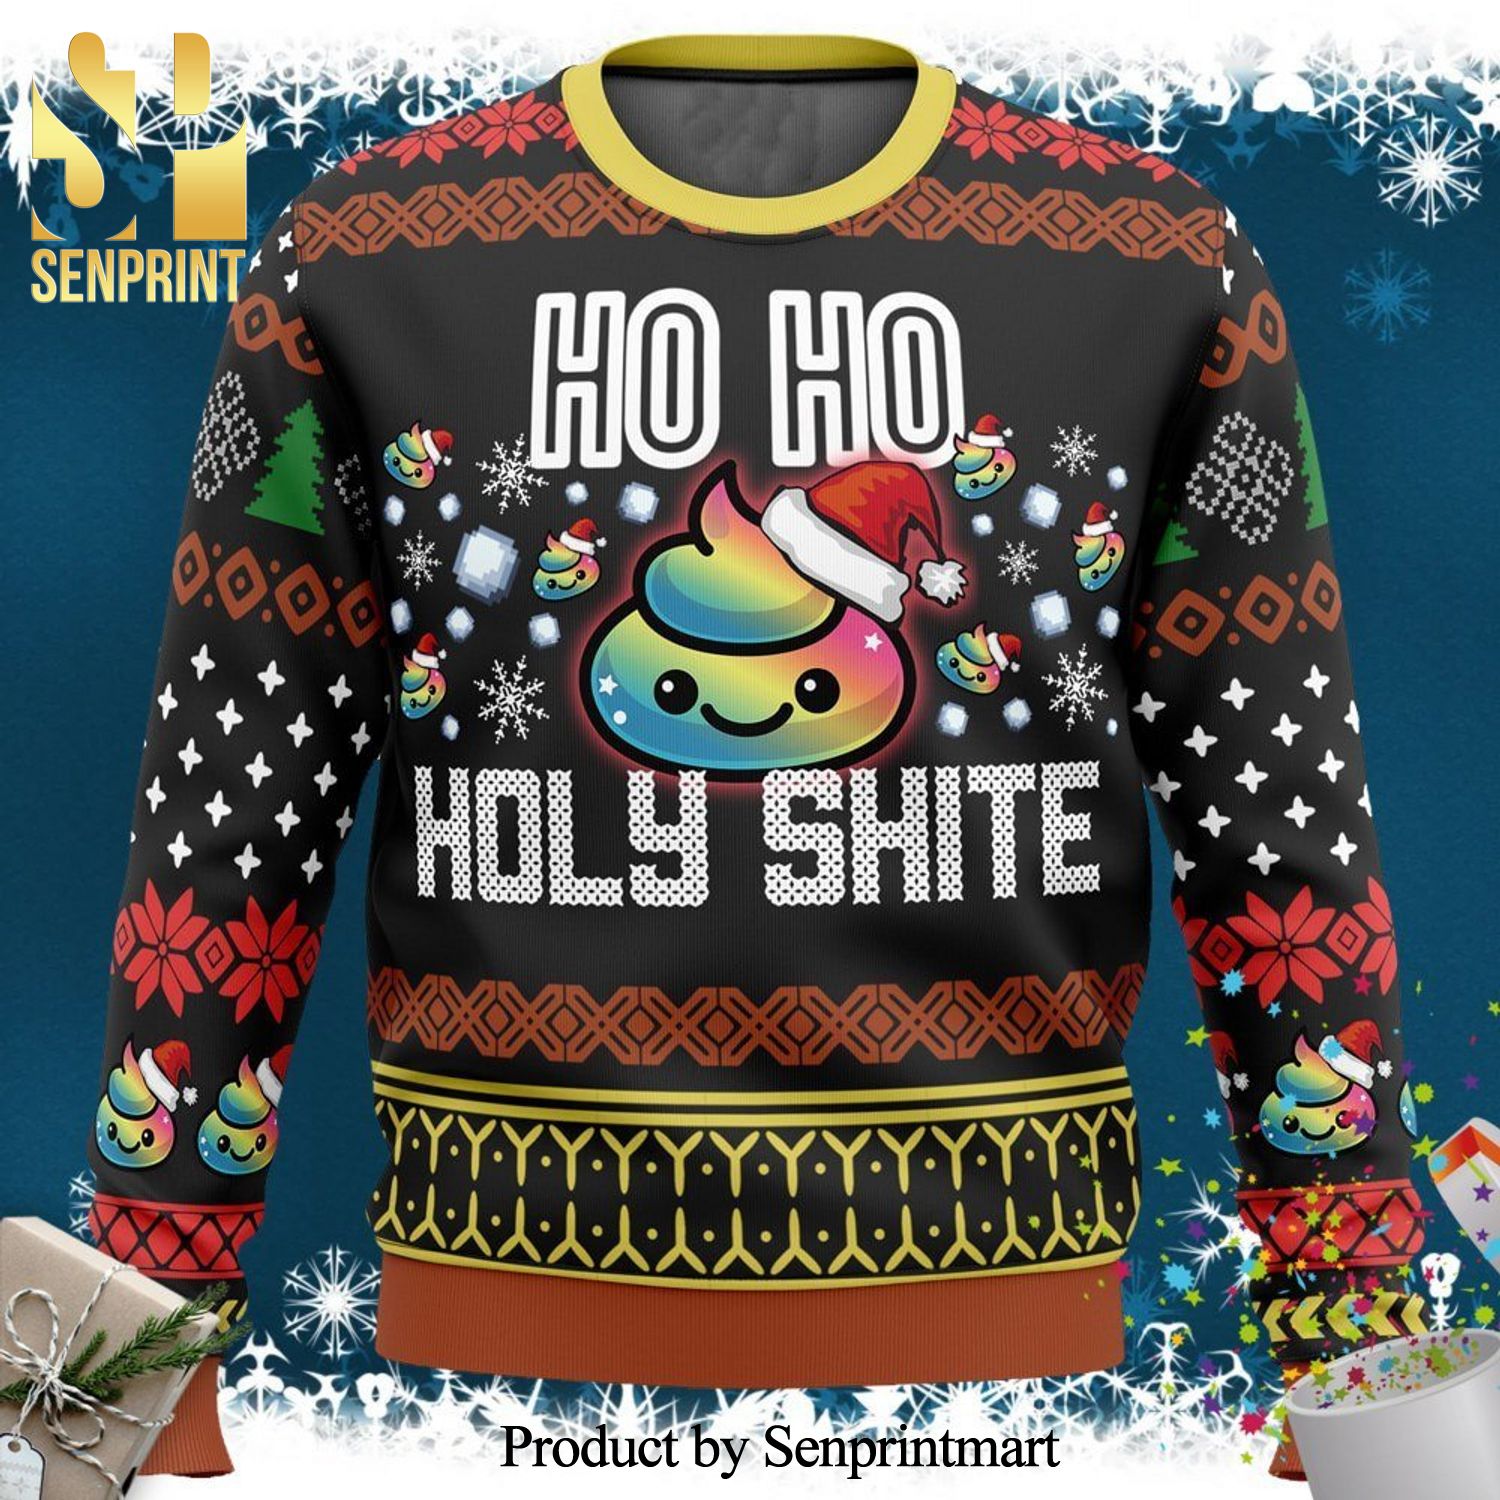 Poop Ho Ho Holy Shite Knitted Ugly Christmas Sweater